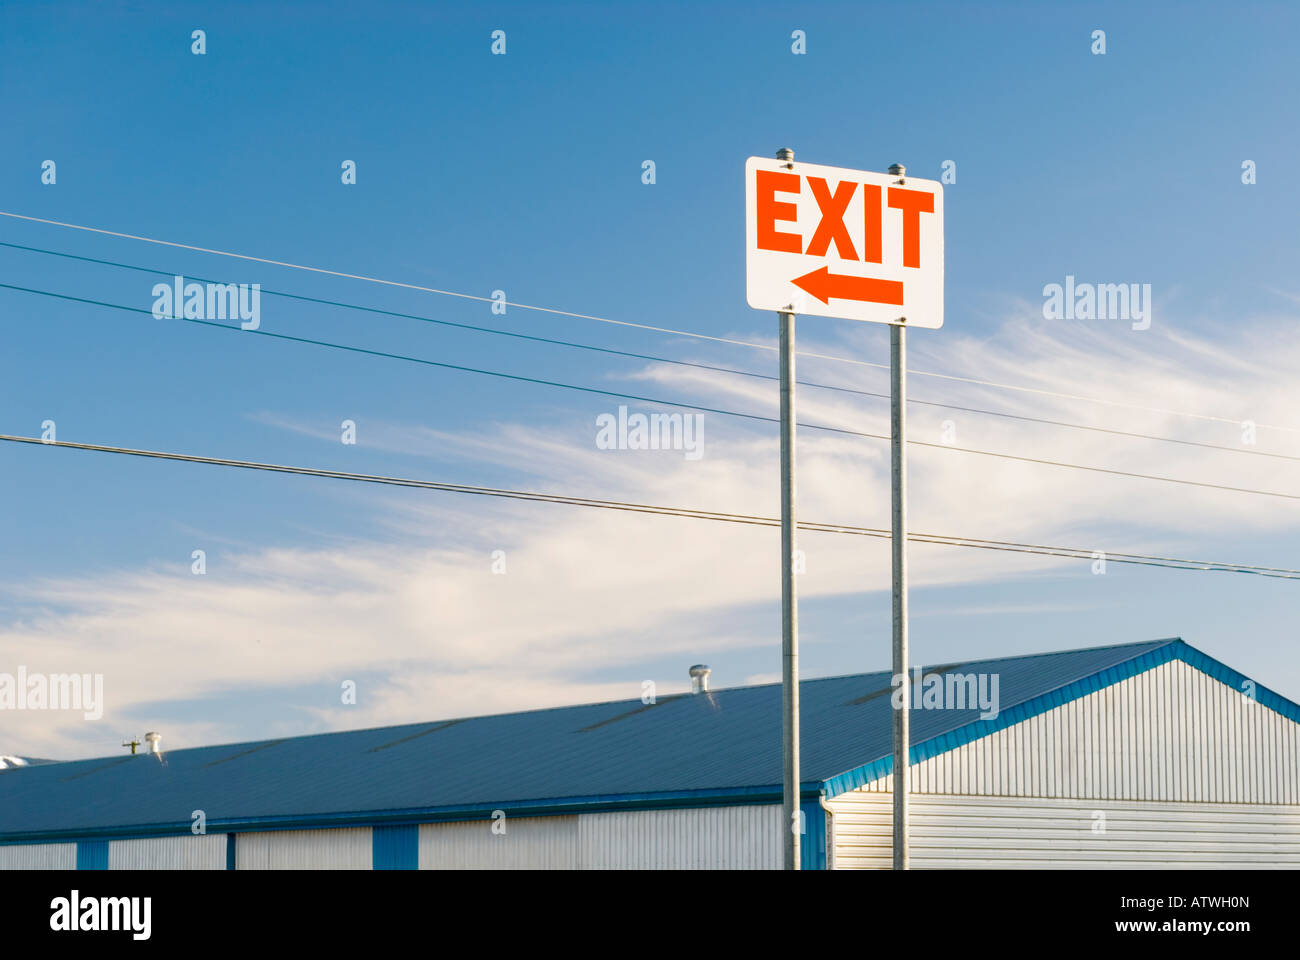 Parking lot exit sign with arrow against a blue sky Stock Photo